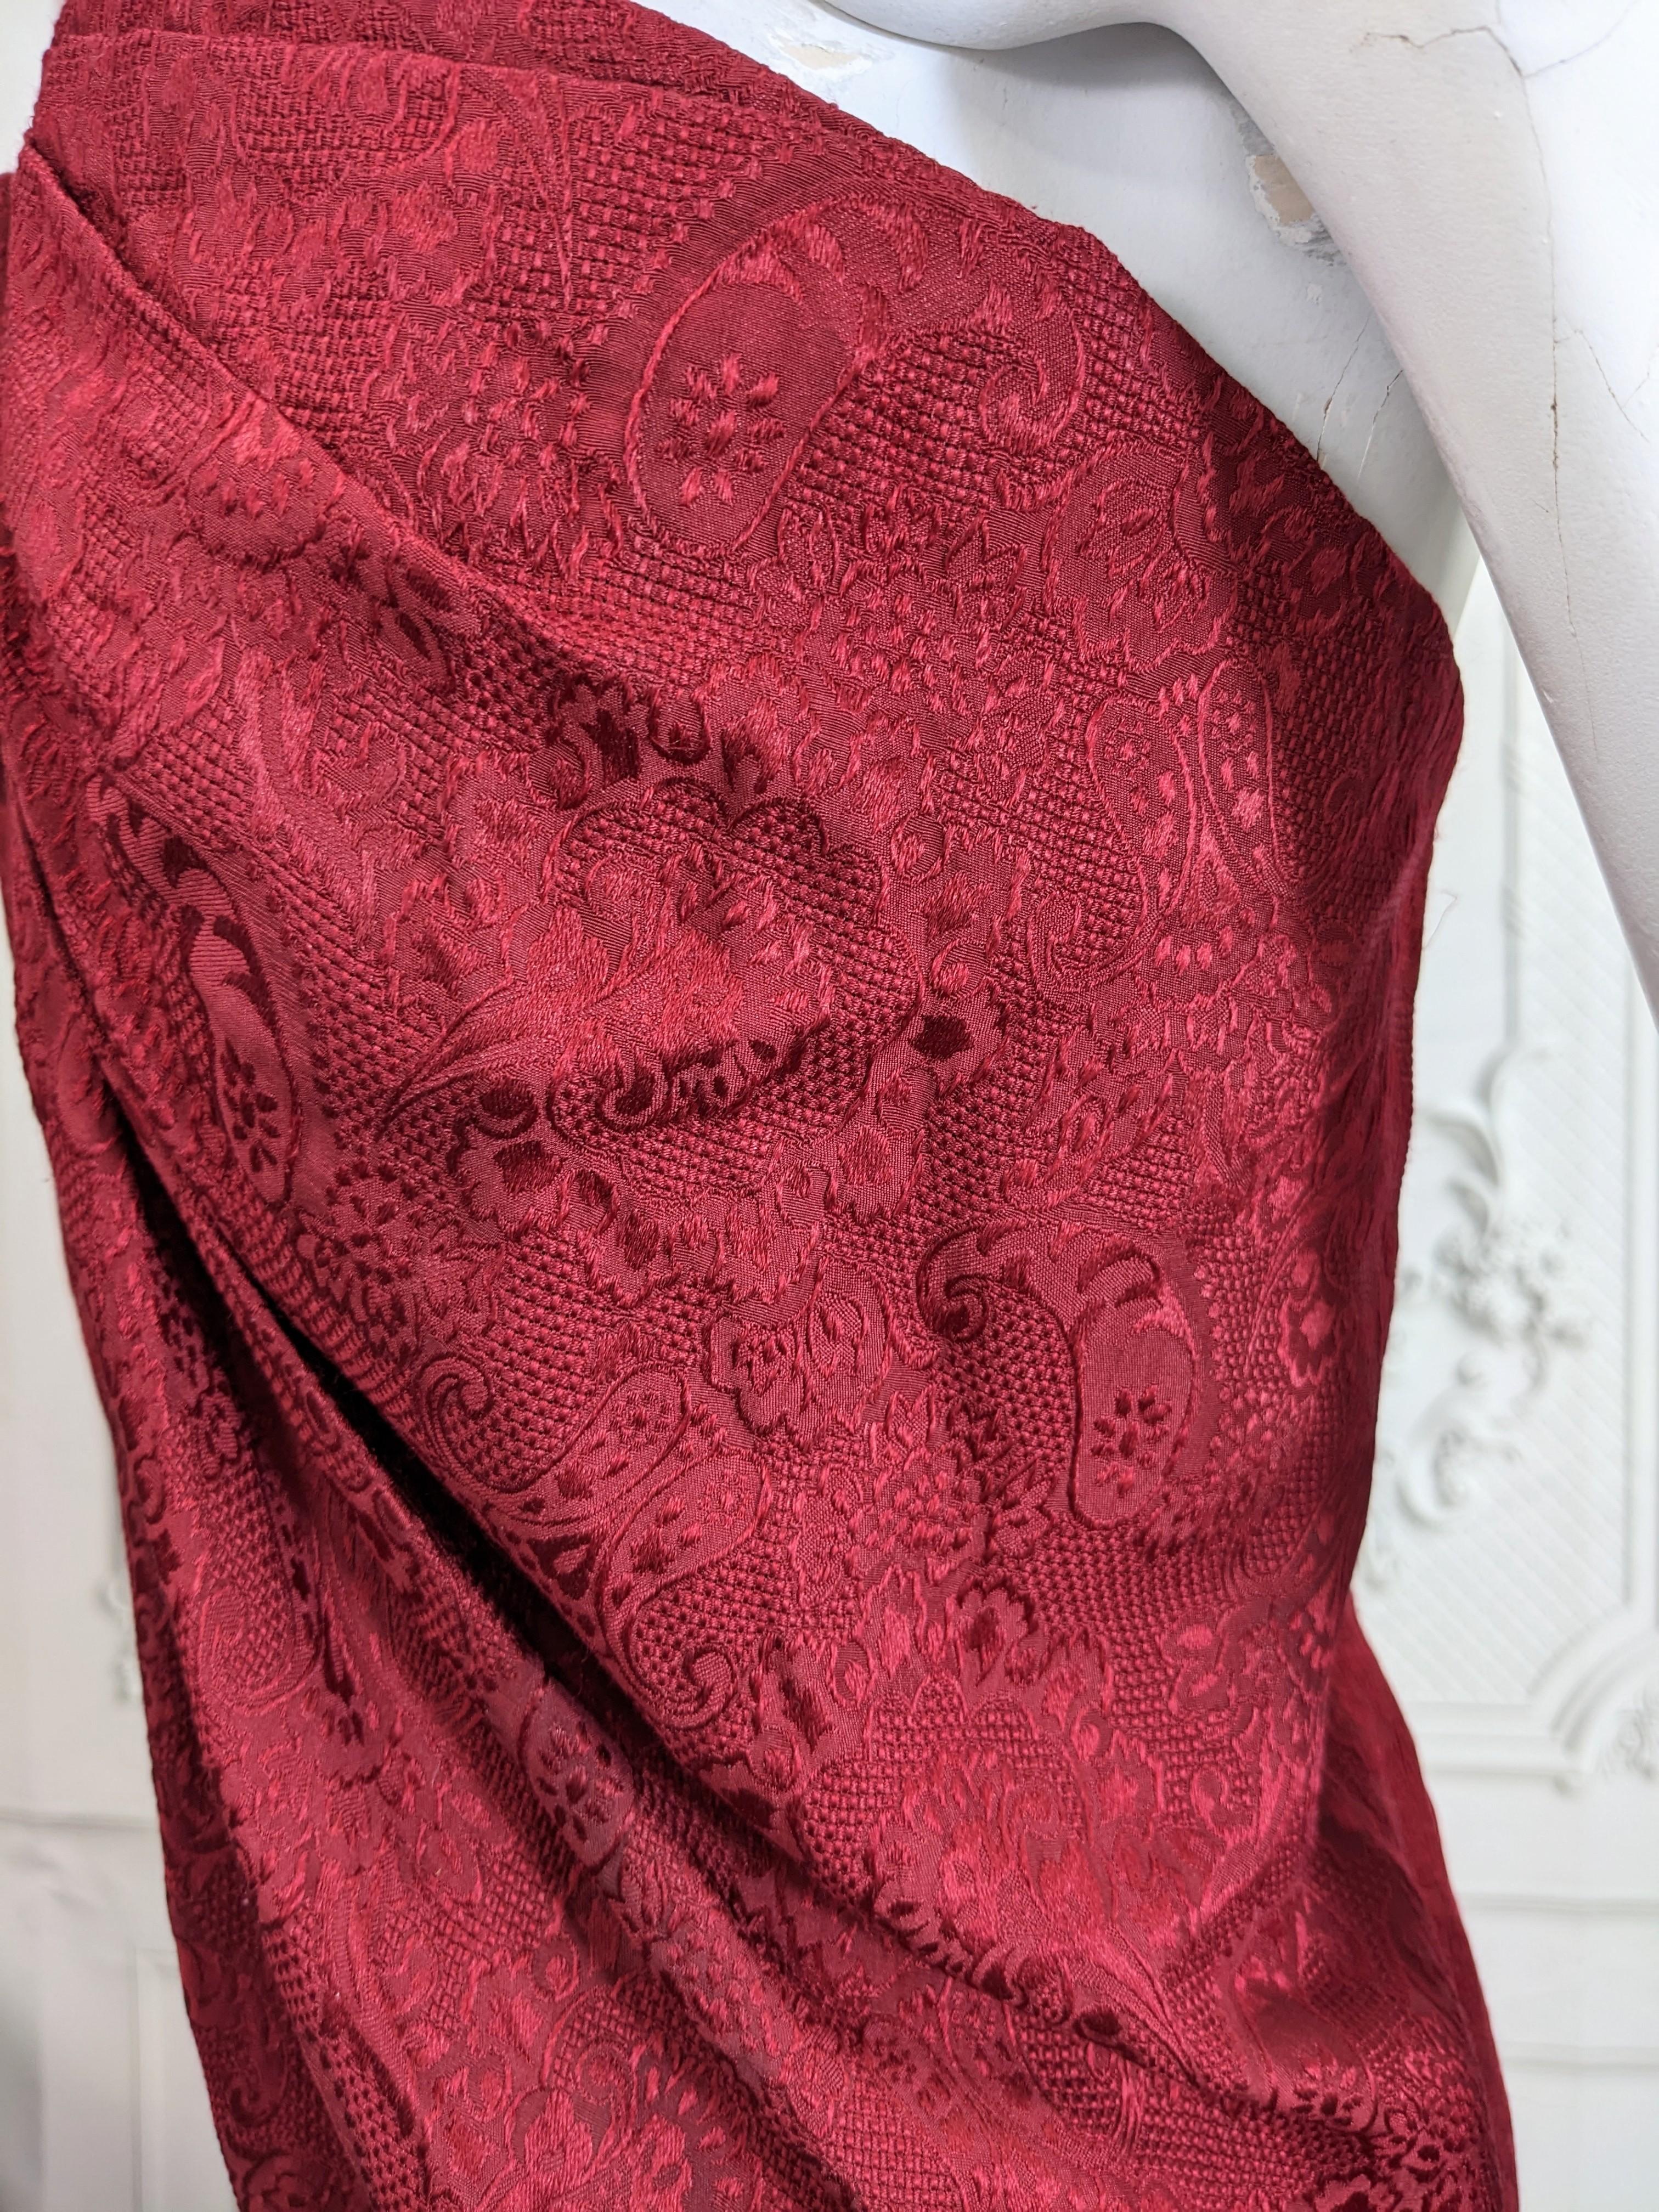 Red Carolyne Roehm Strapless Burgundy Organza Gown For Sale